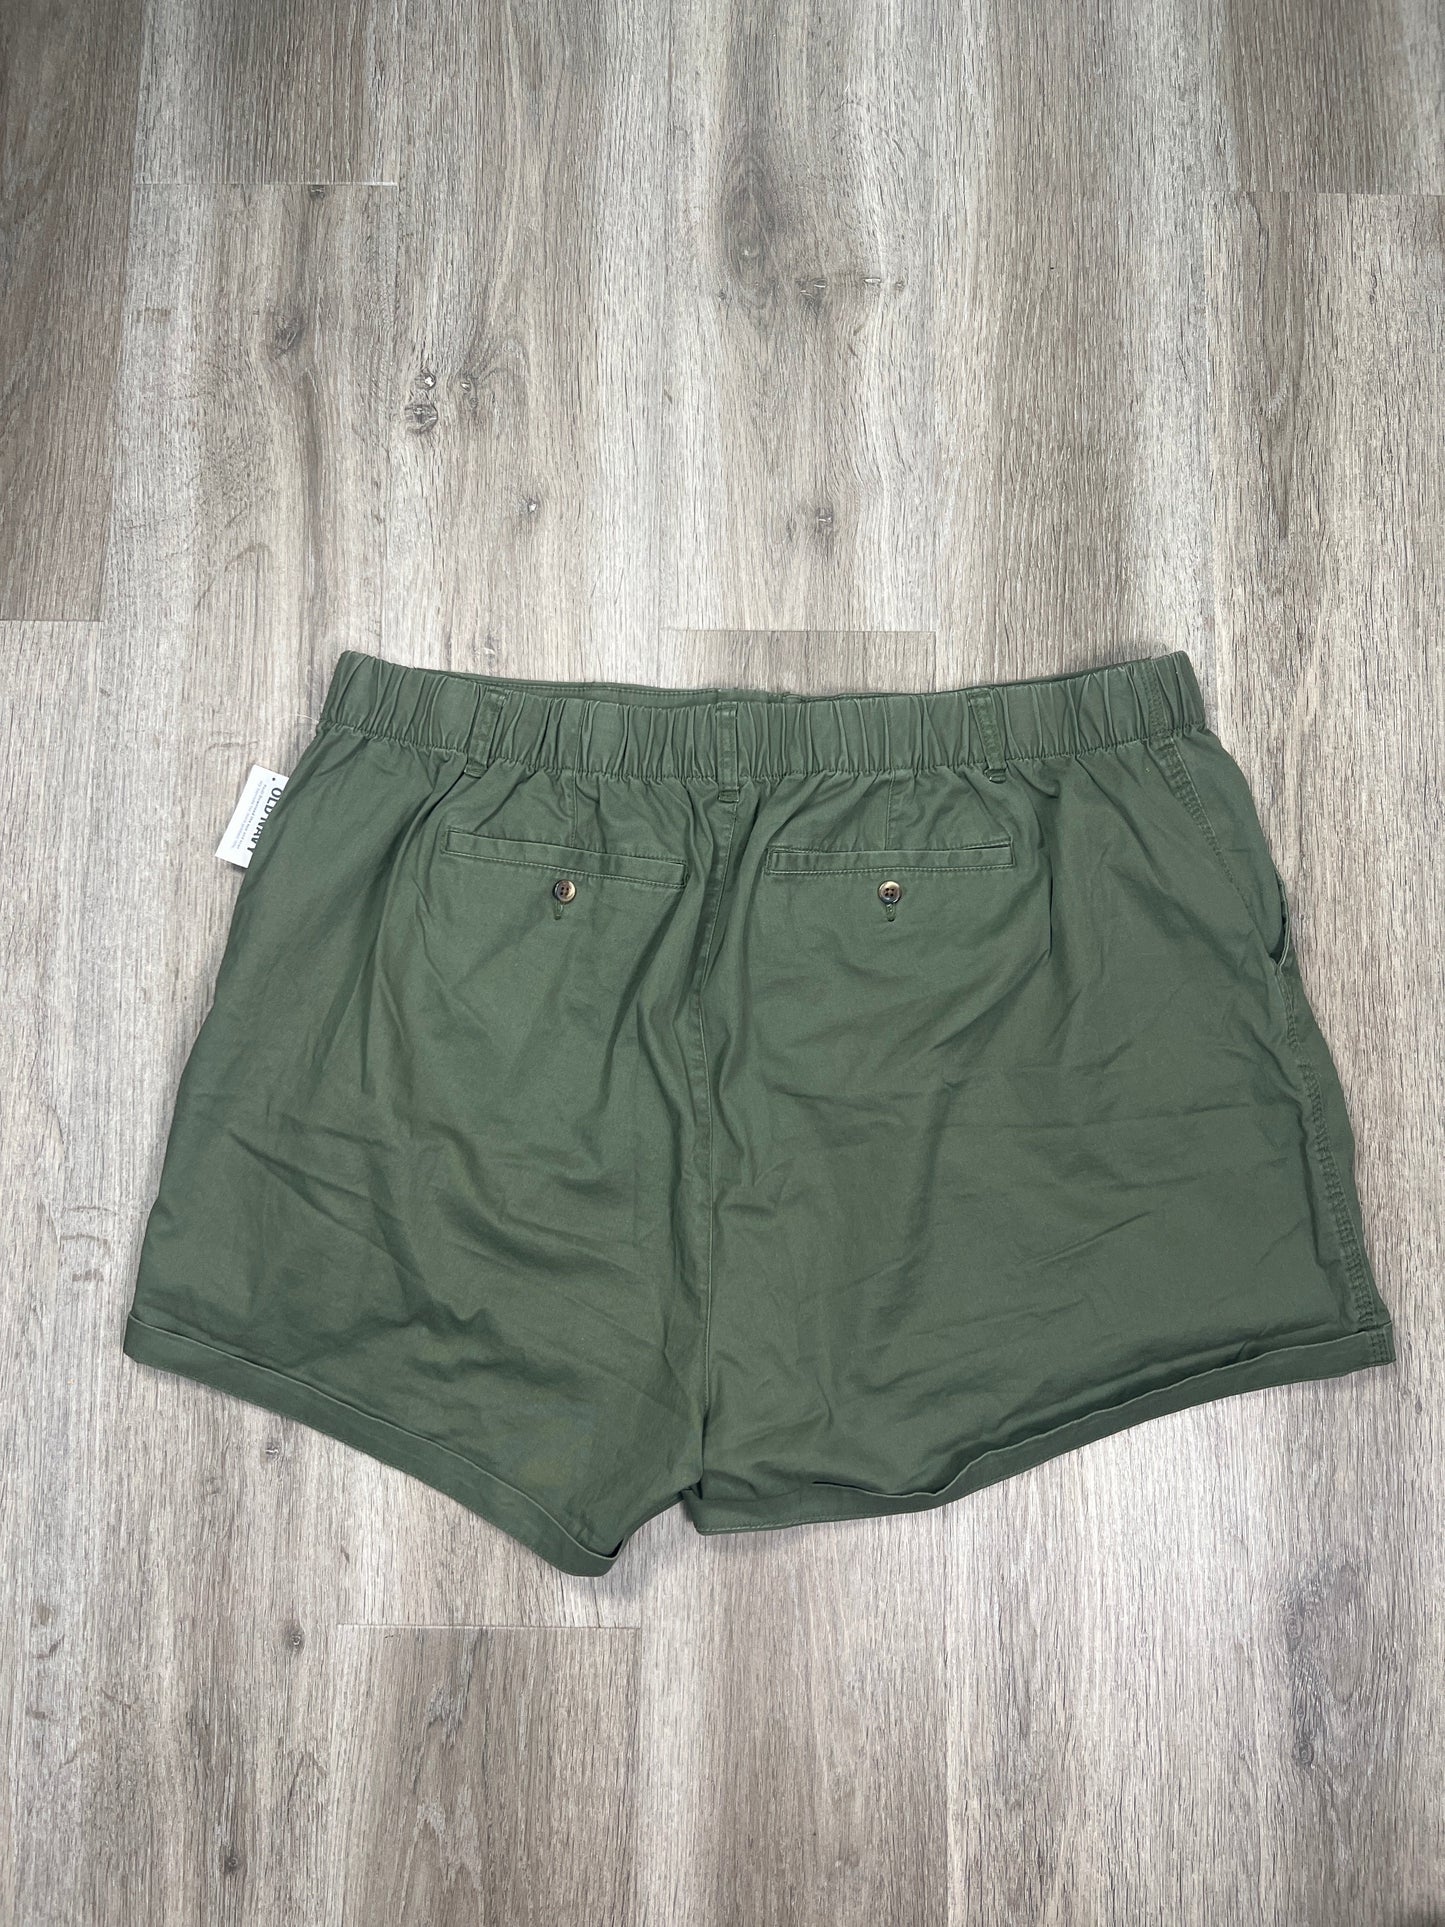 Green Shorts Old Navy, Size 3x